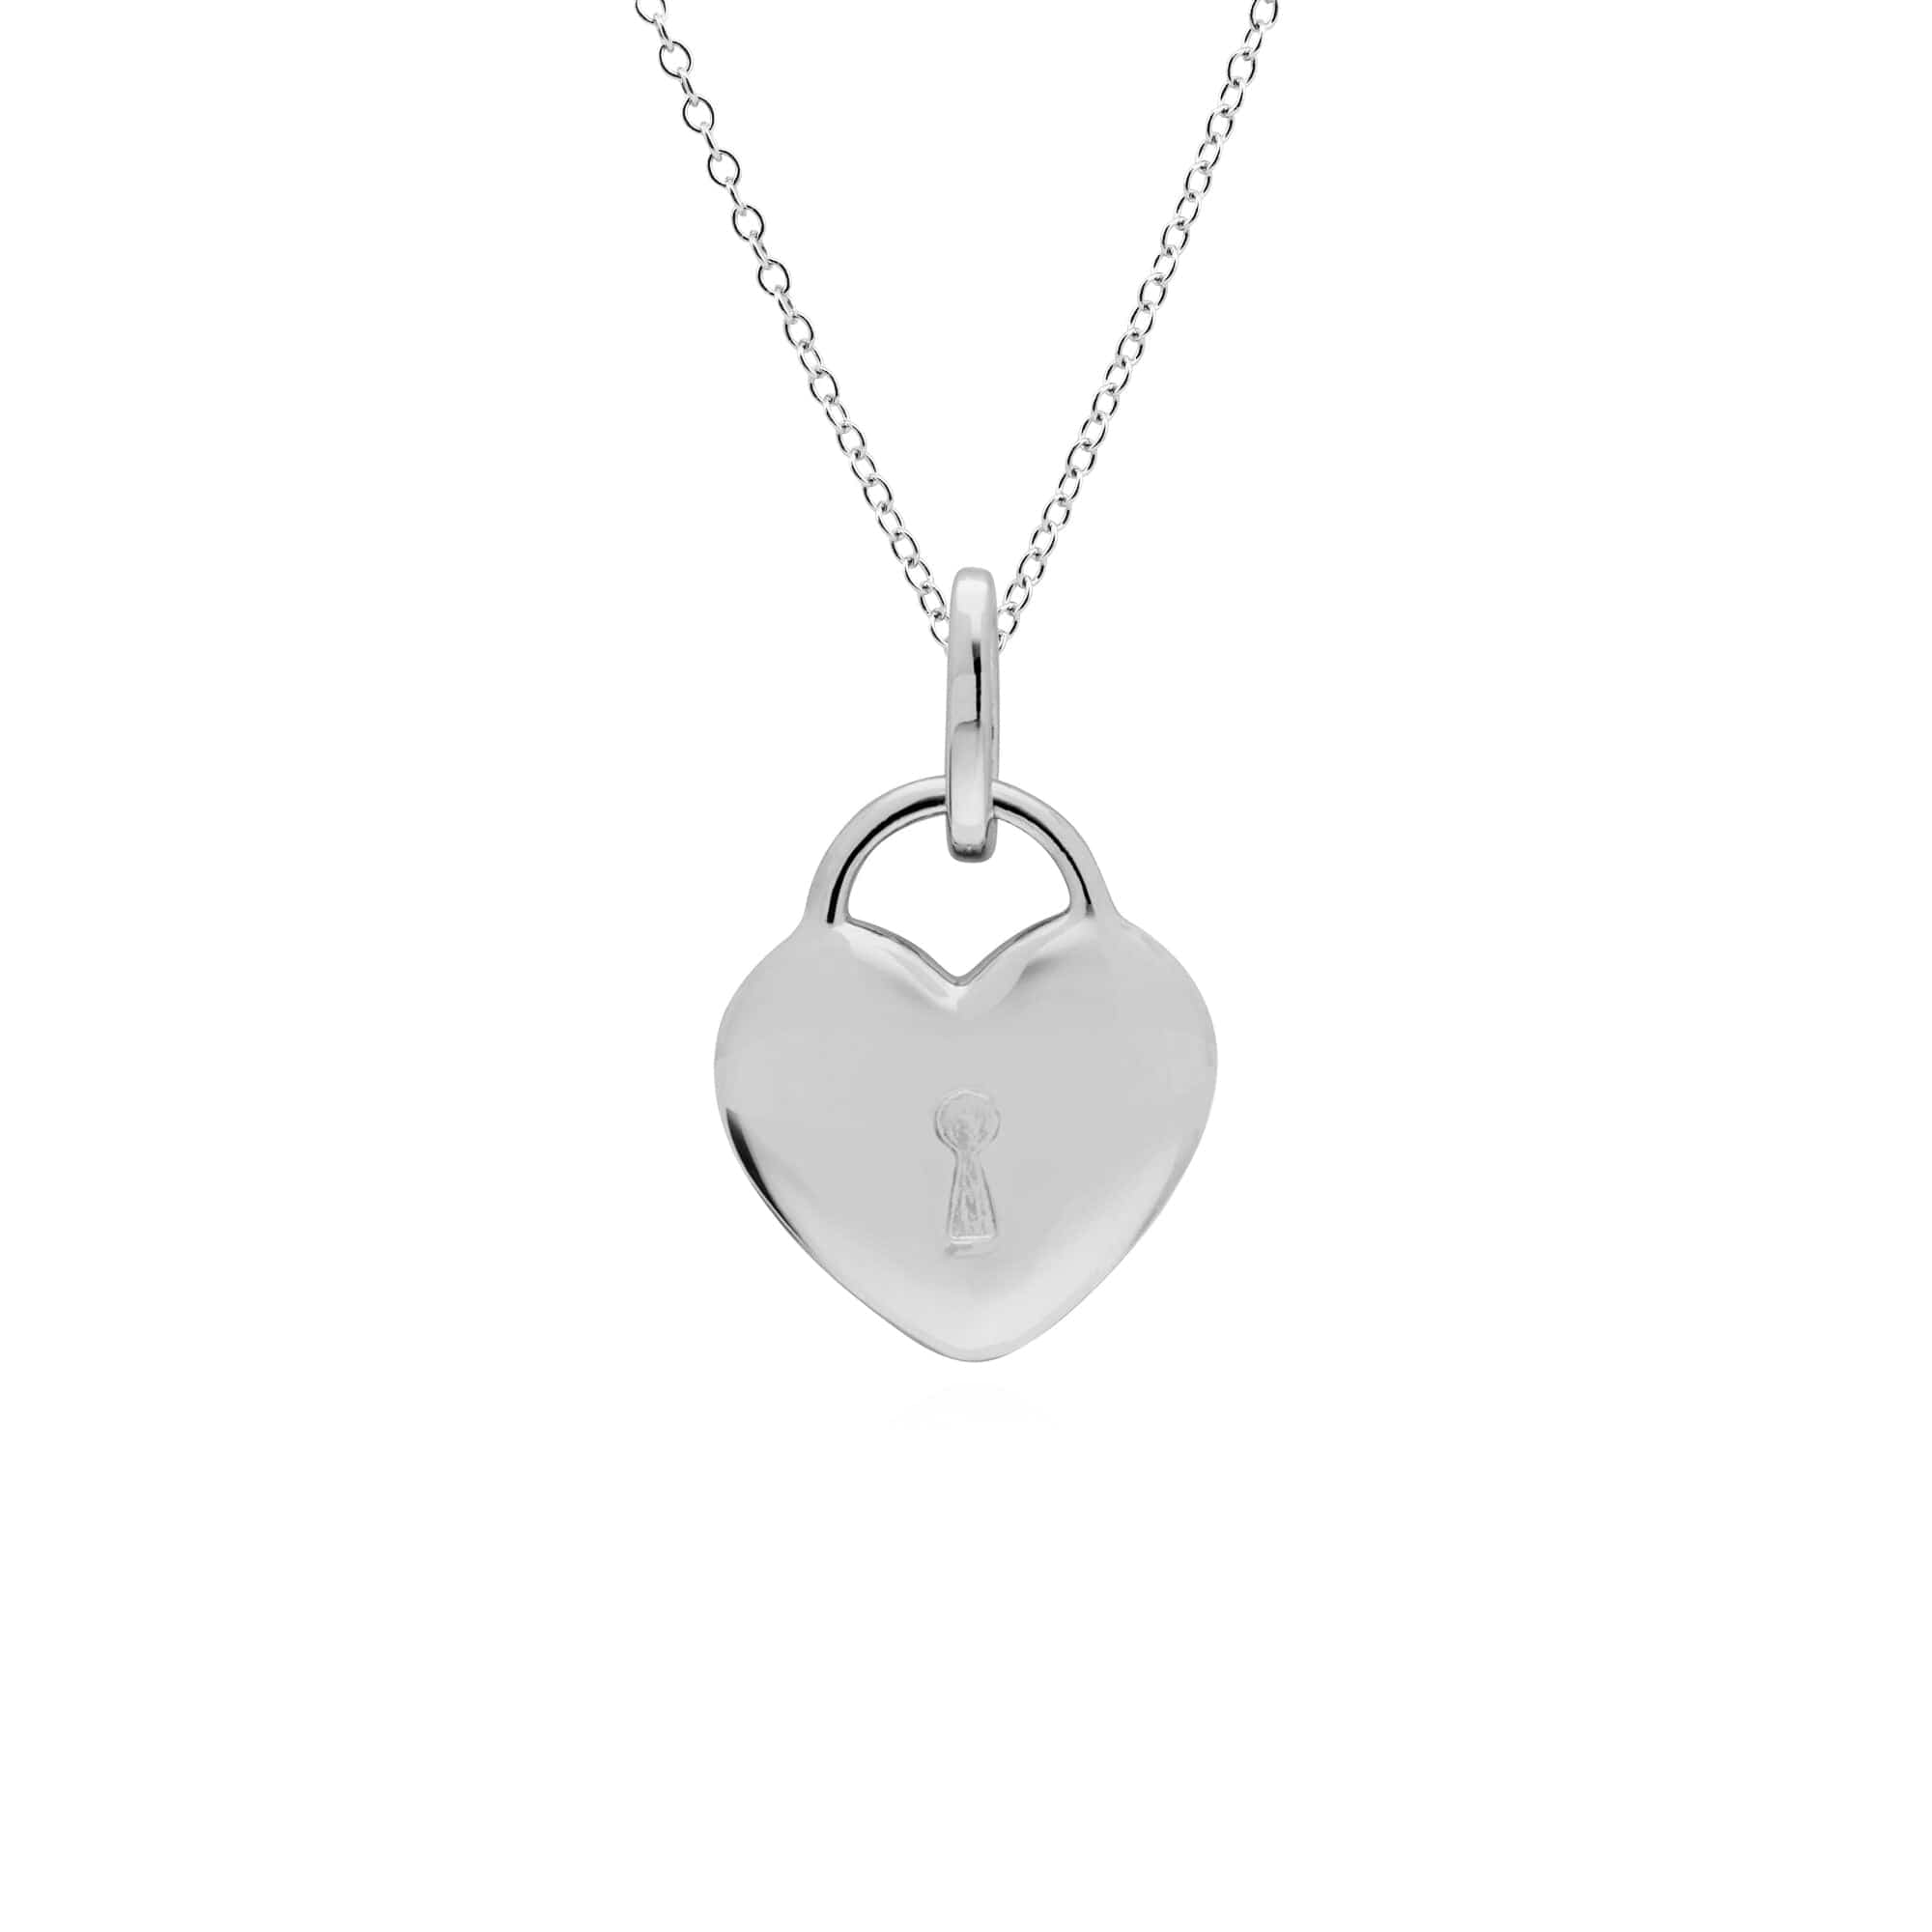 270P027610925-270P027001925 Classic Heart Lock Pendant & Sapphire Charm in 925 Sterling Silver 3